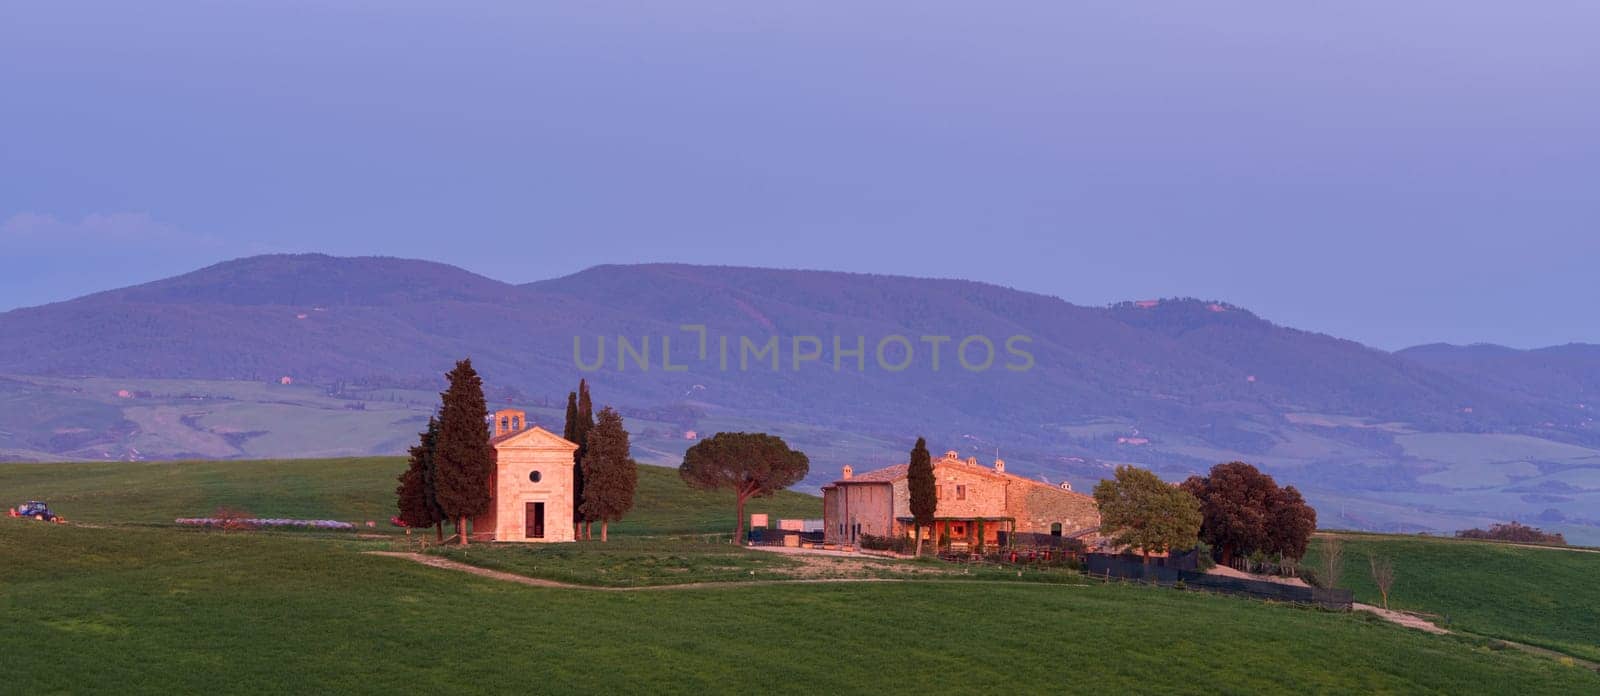 House surrounded by cypress trees among the misty morning sun-drenched hills of the Val d'Orcia valley at sunrise in San Quirico d'Orcia, Tuscany, Italy by Sonat